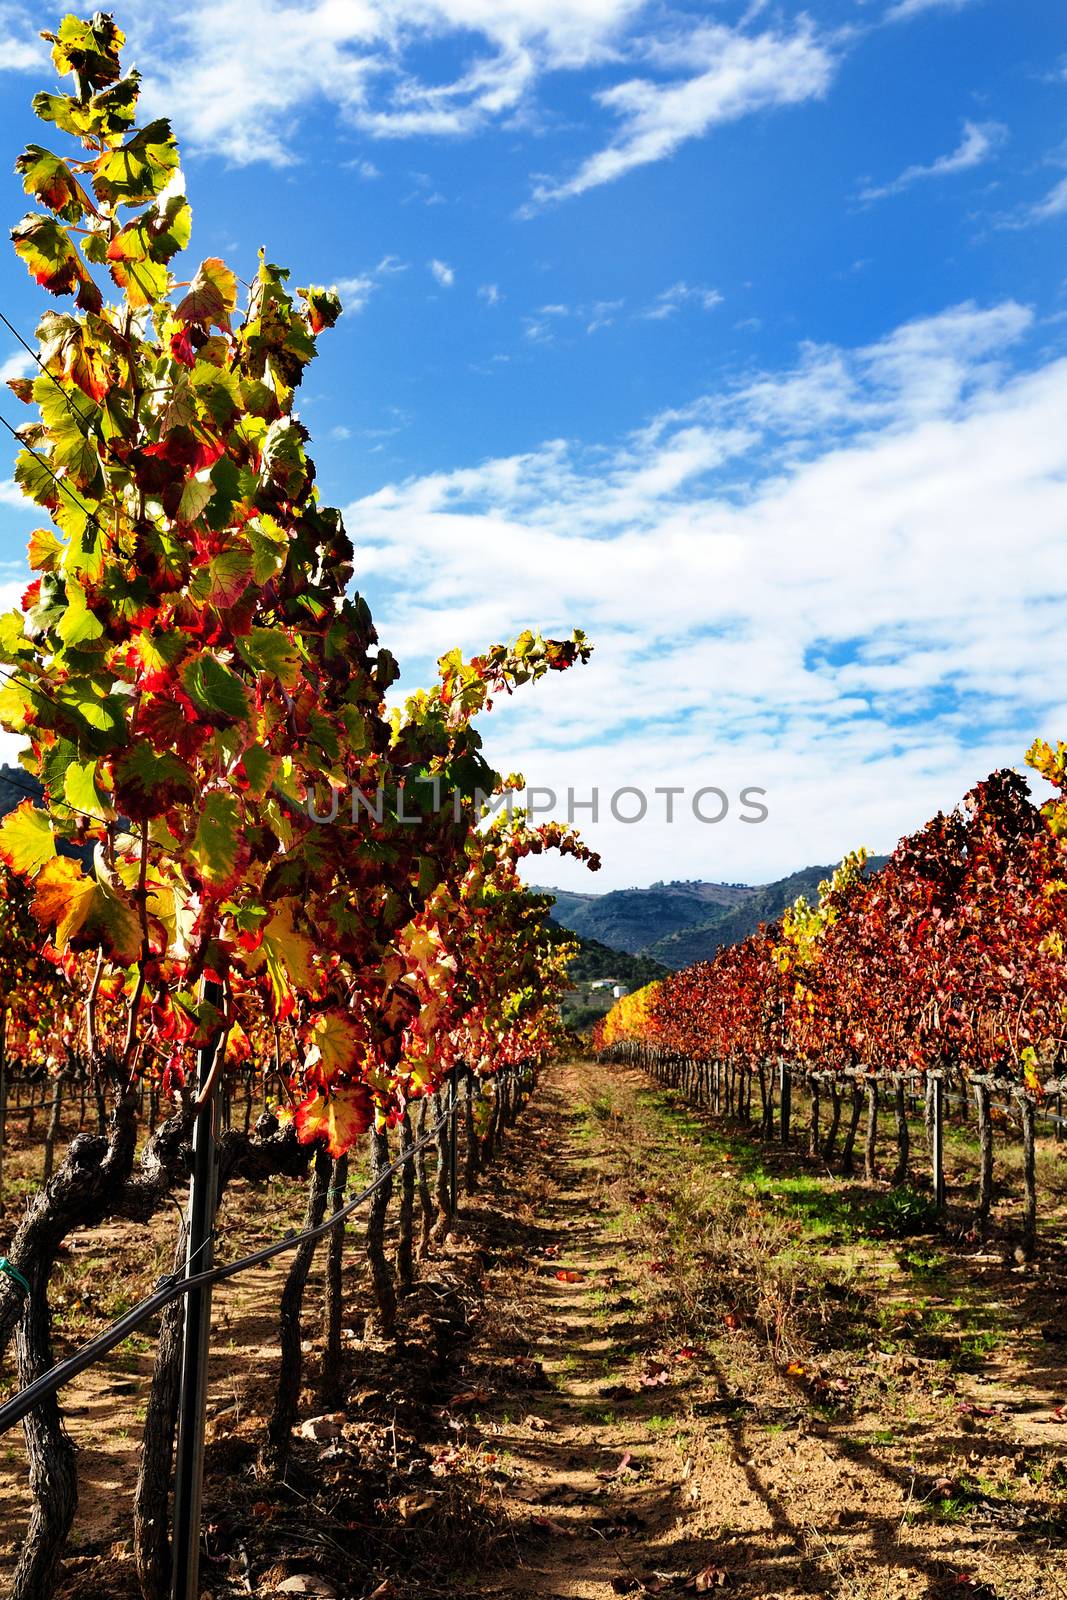 Details of vineyards, rows of vines young and old with the colors of autumn.